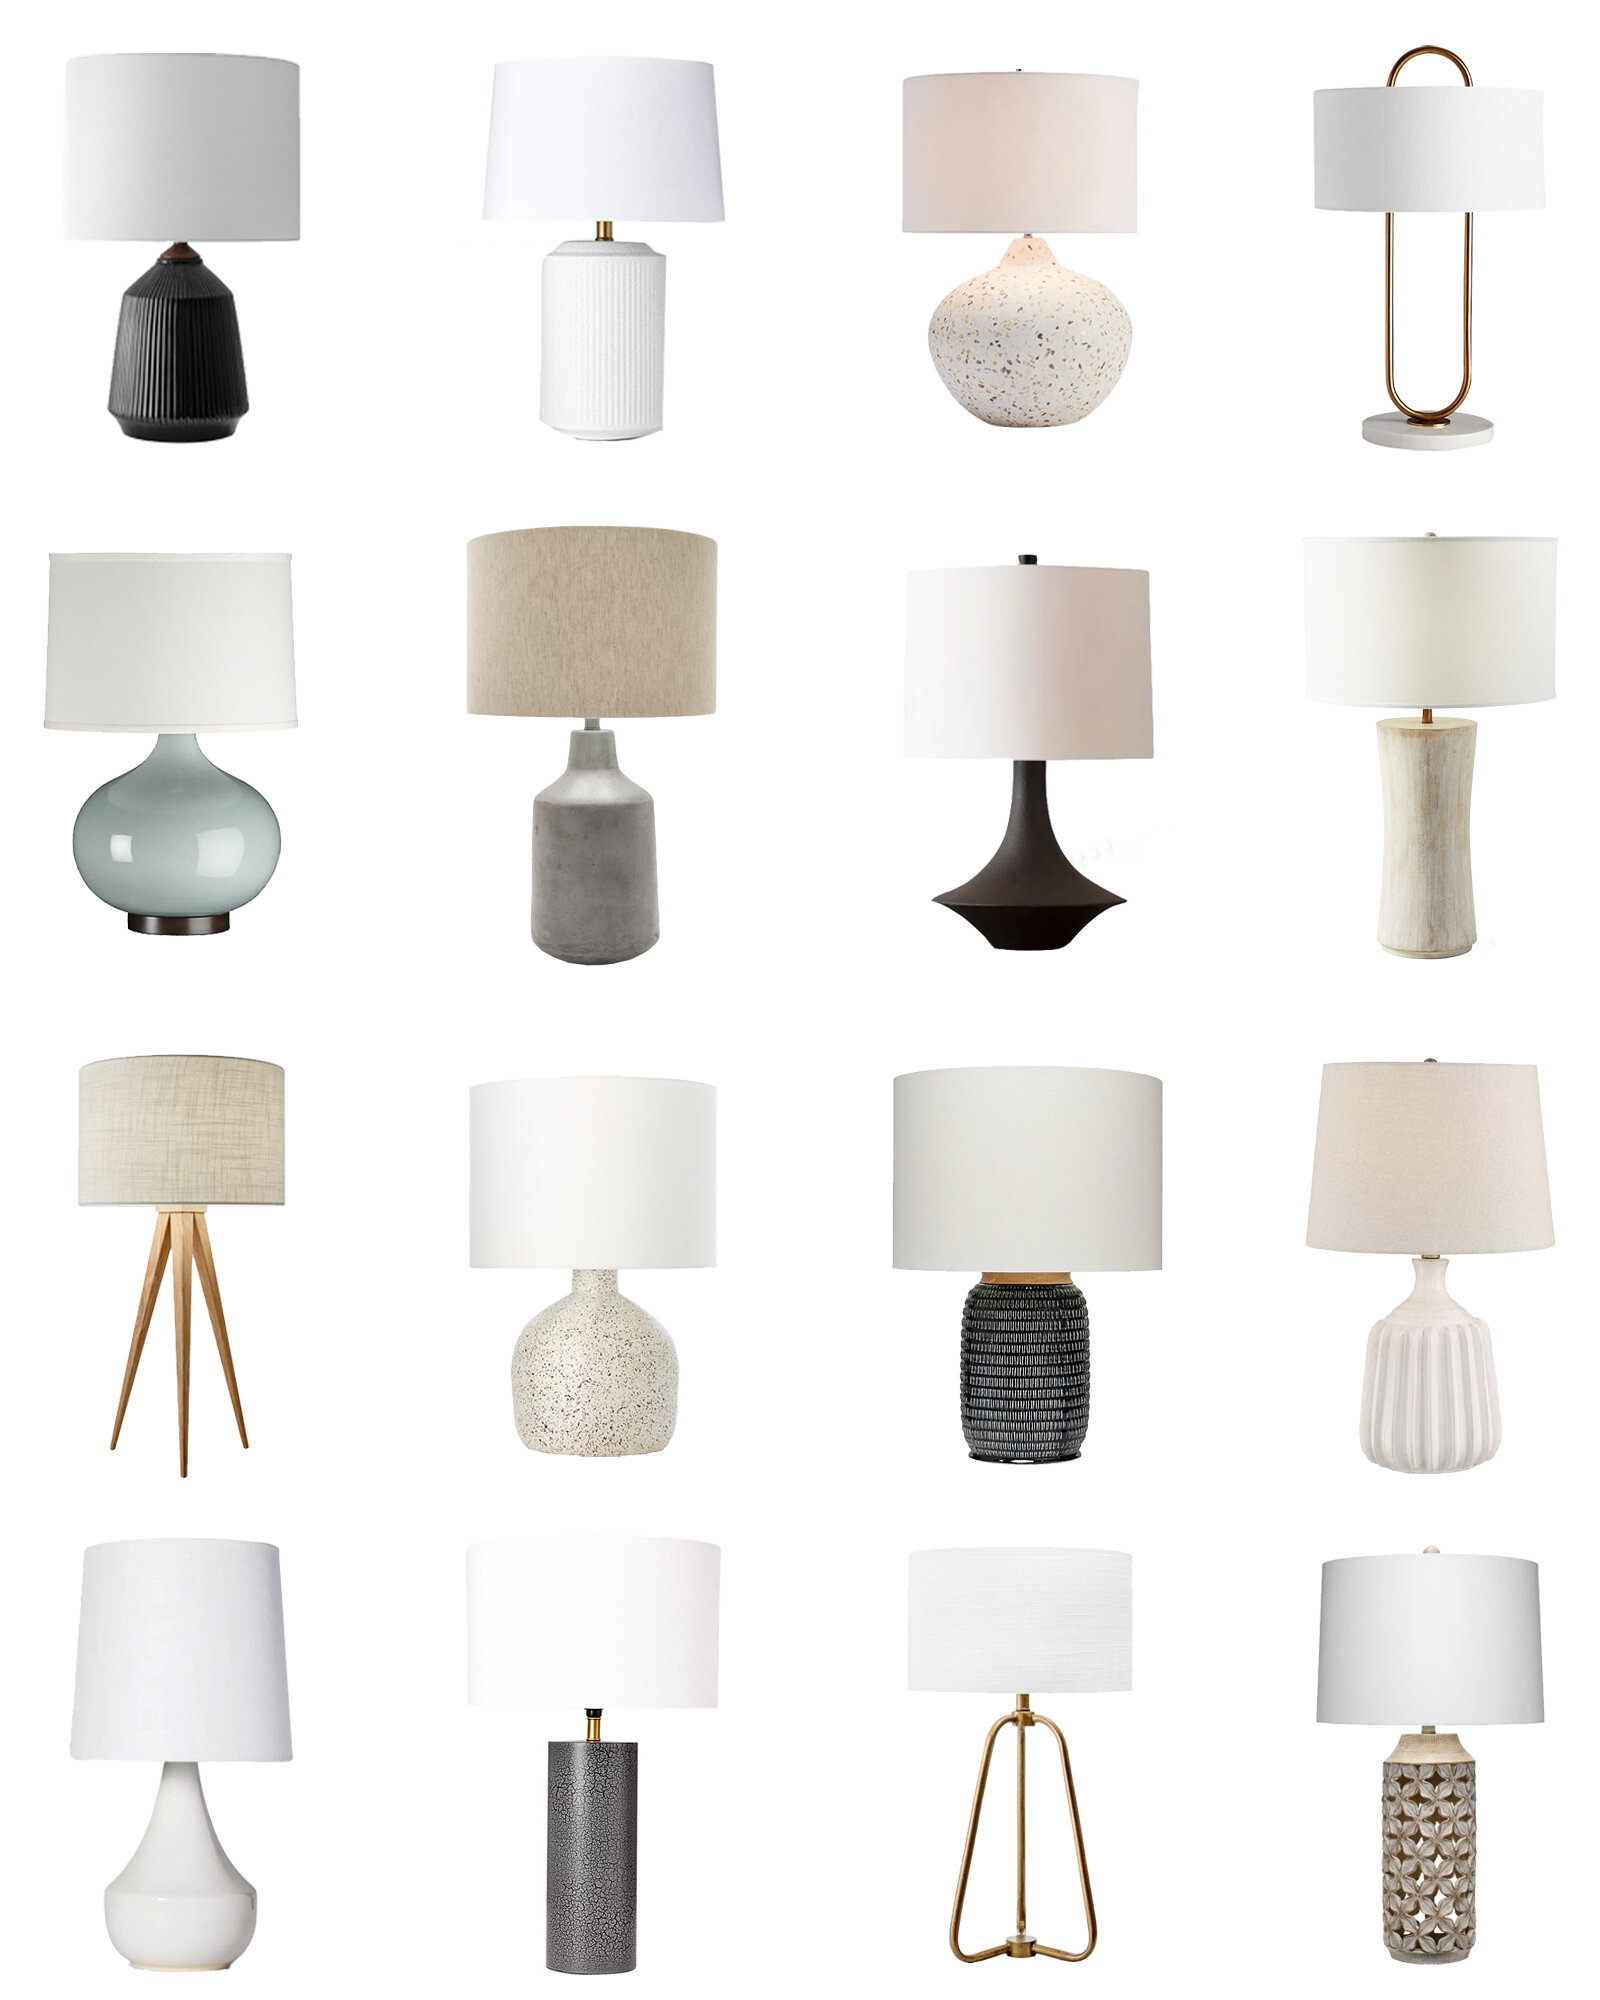 How to Choose a Table Lamp (Along with 16 Lovely Options!)